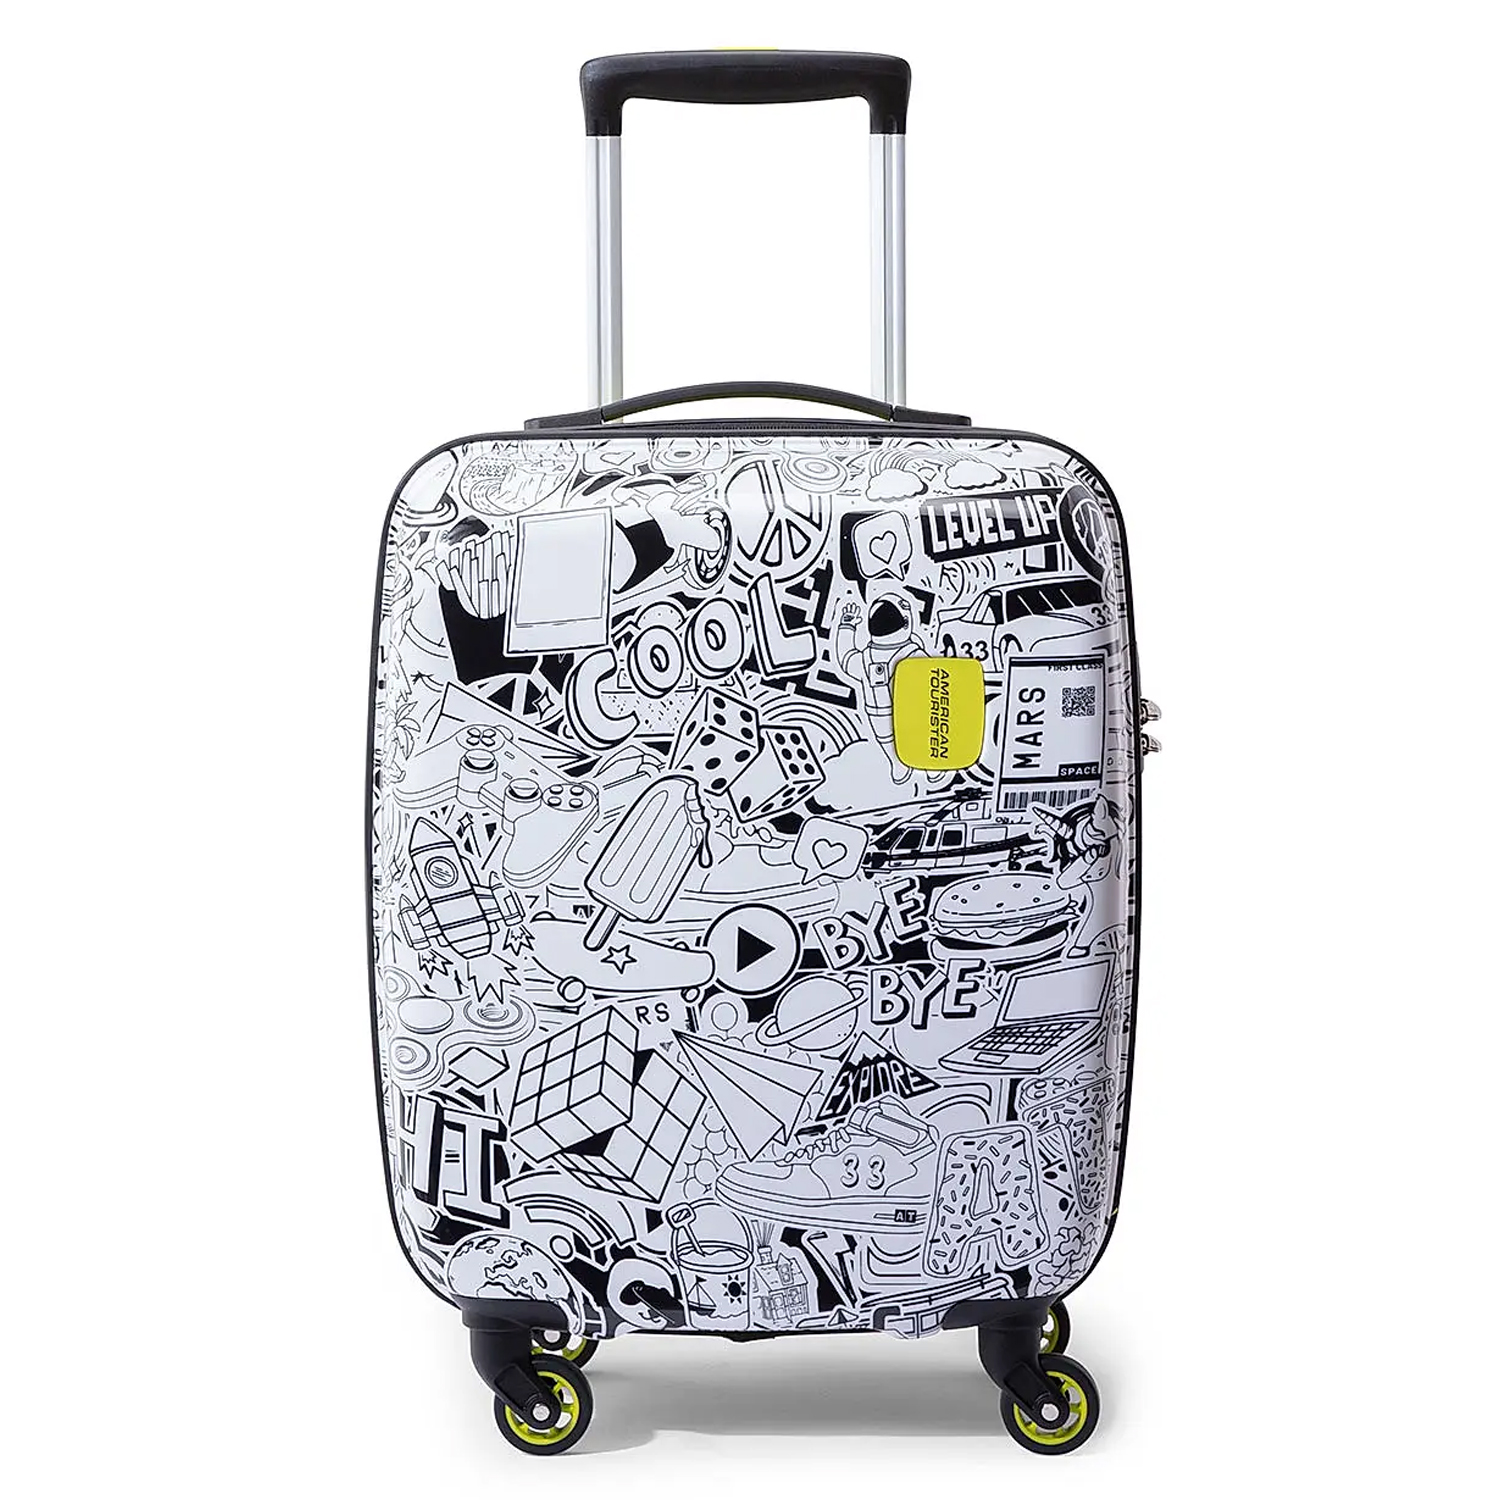 RoshanBags_AMERICAN TOURISTER SWAG ON KIDS LUGGAGE STROLLY GRAFFITI WHITE